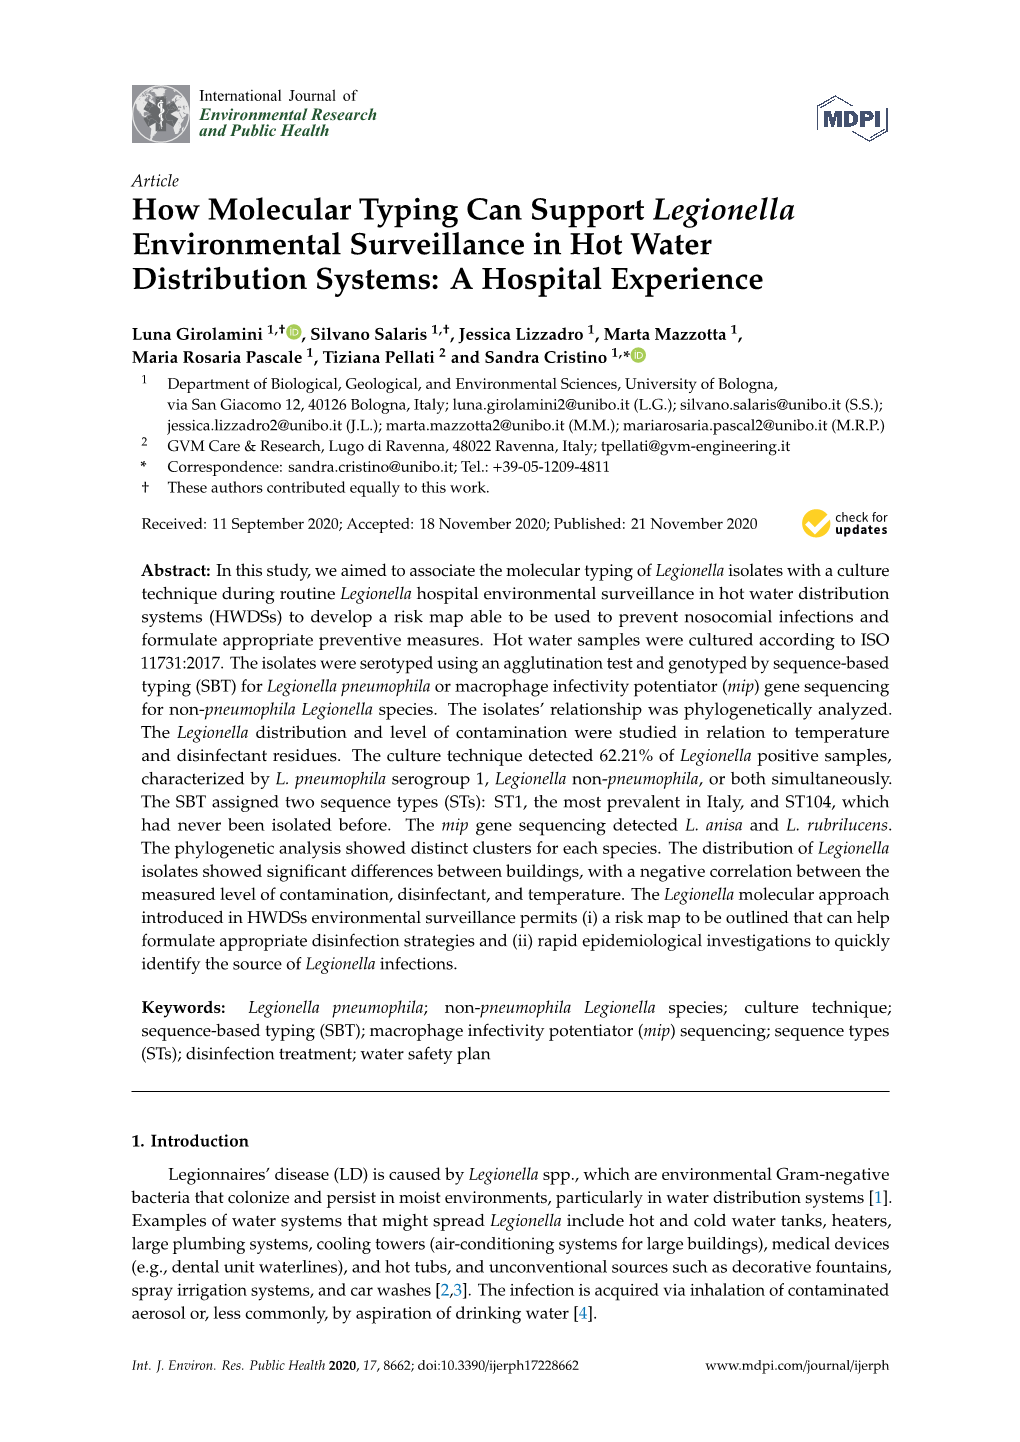 How Molecular Typing Can Support Legionella Environmental Surveillance in Hot Water Distribution Systems: a Hospital Experience